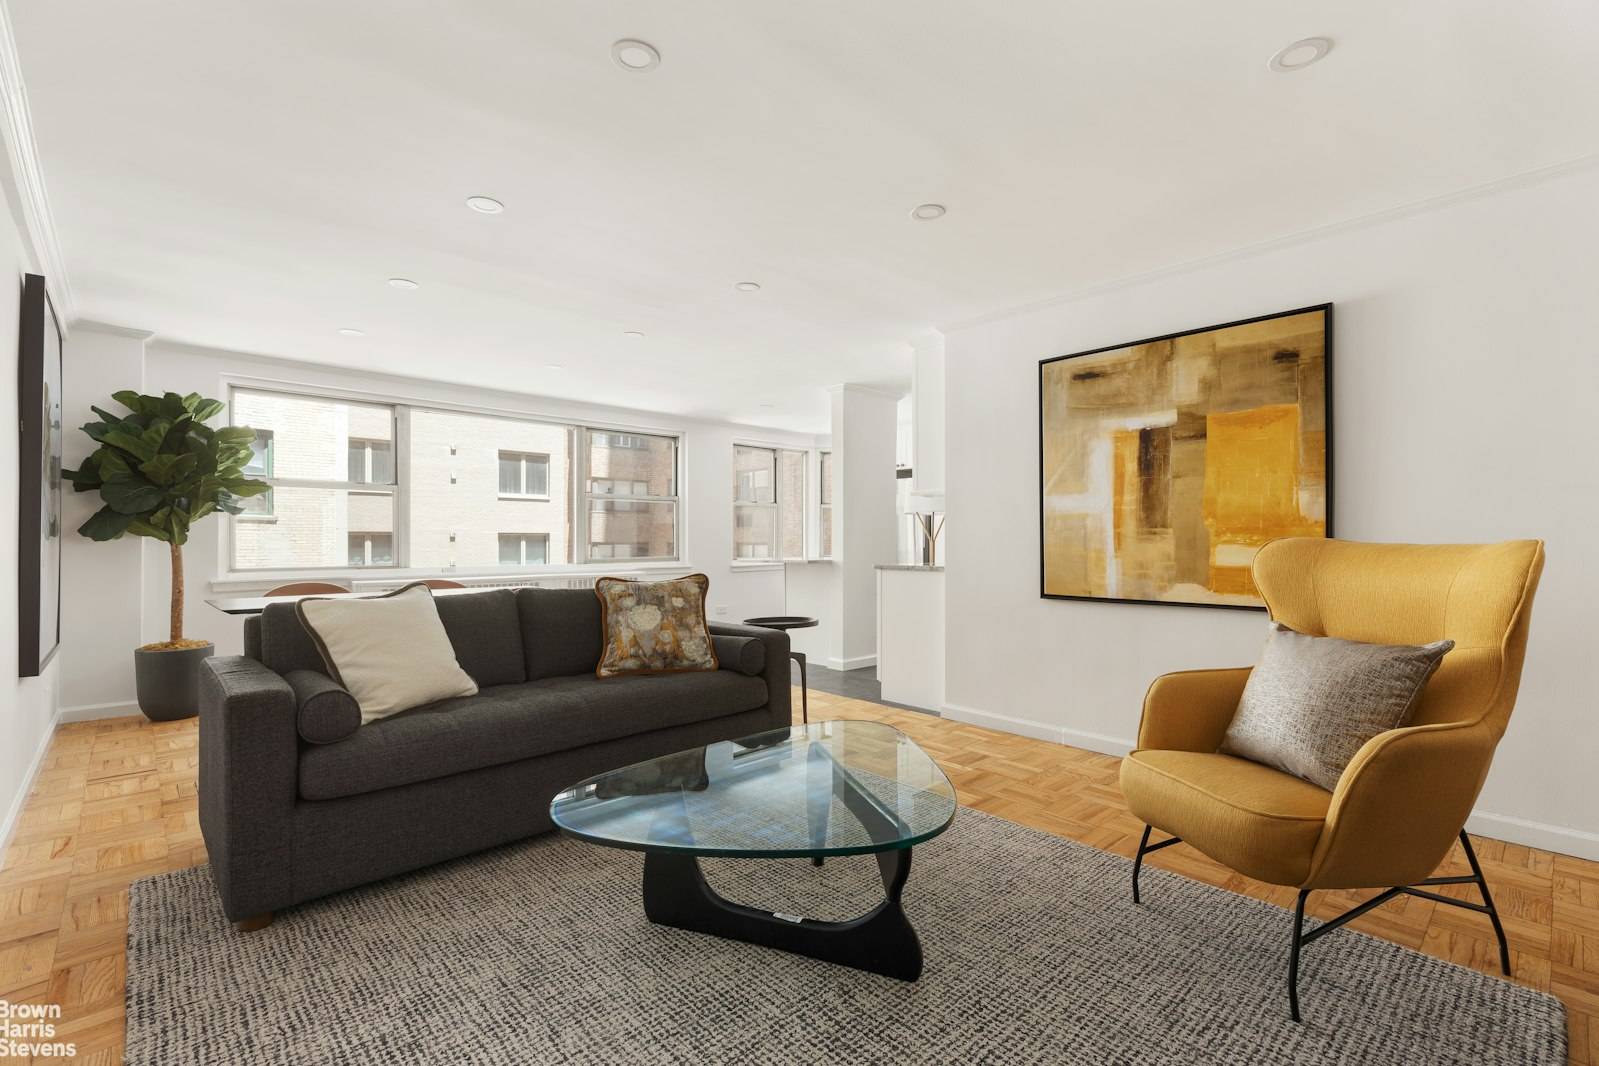 Nestled in the heart of Lenox Hill, Residence 3A at 233 East 69th Street offers a beautifully renovated and spacious home.